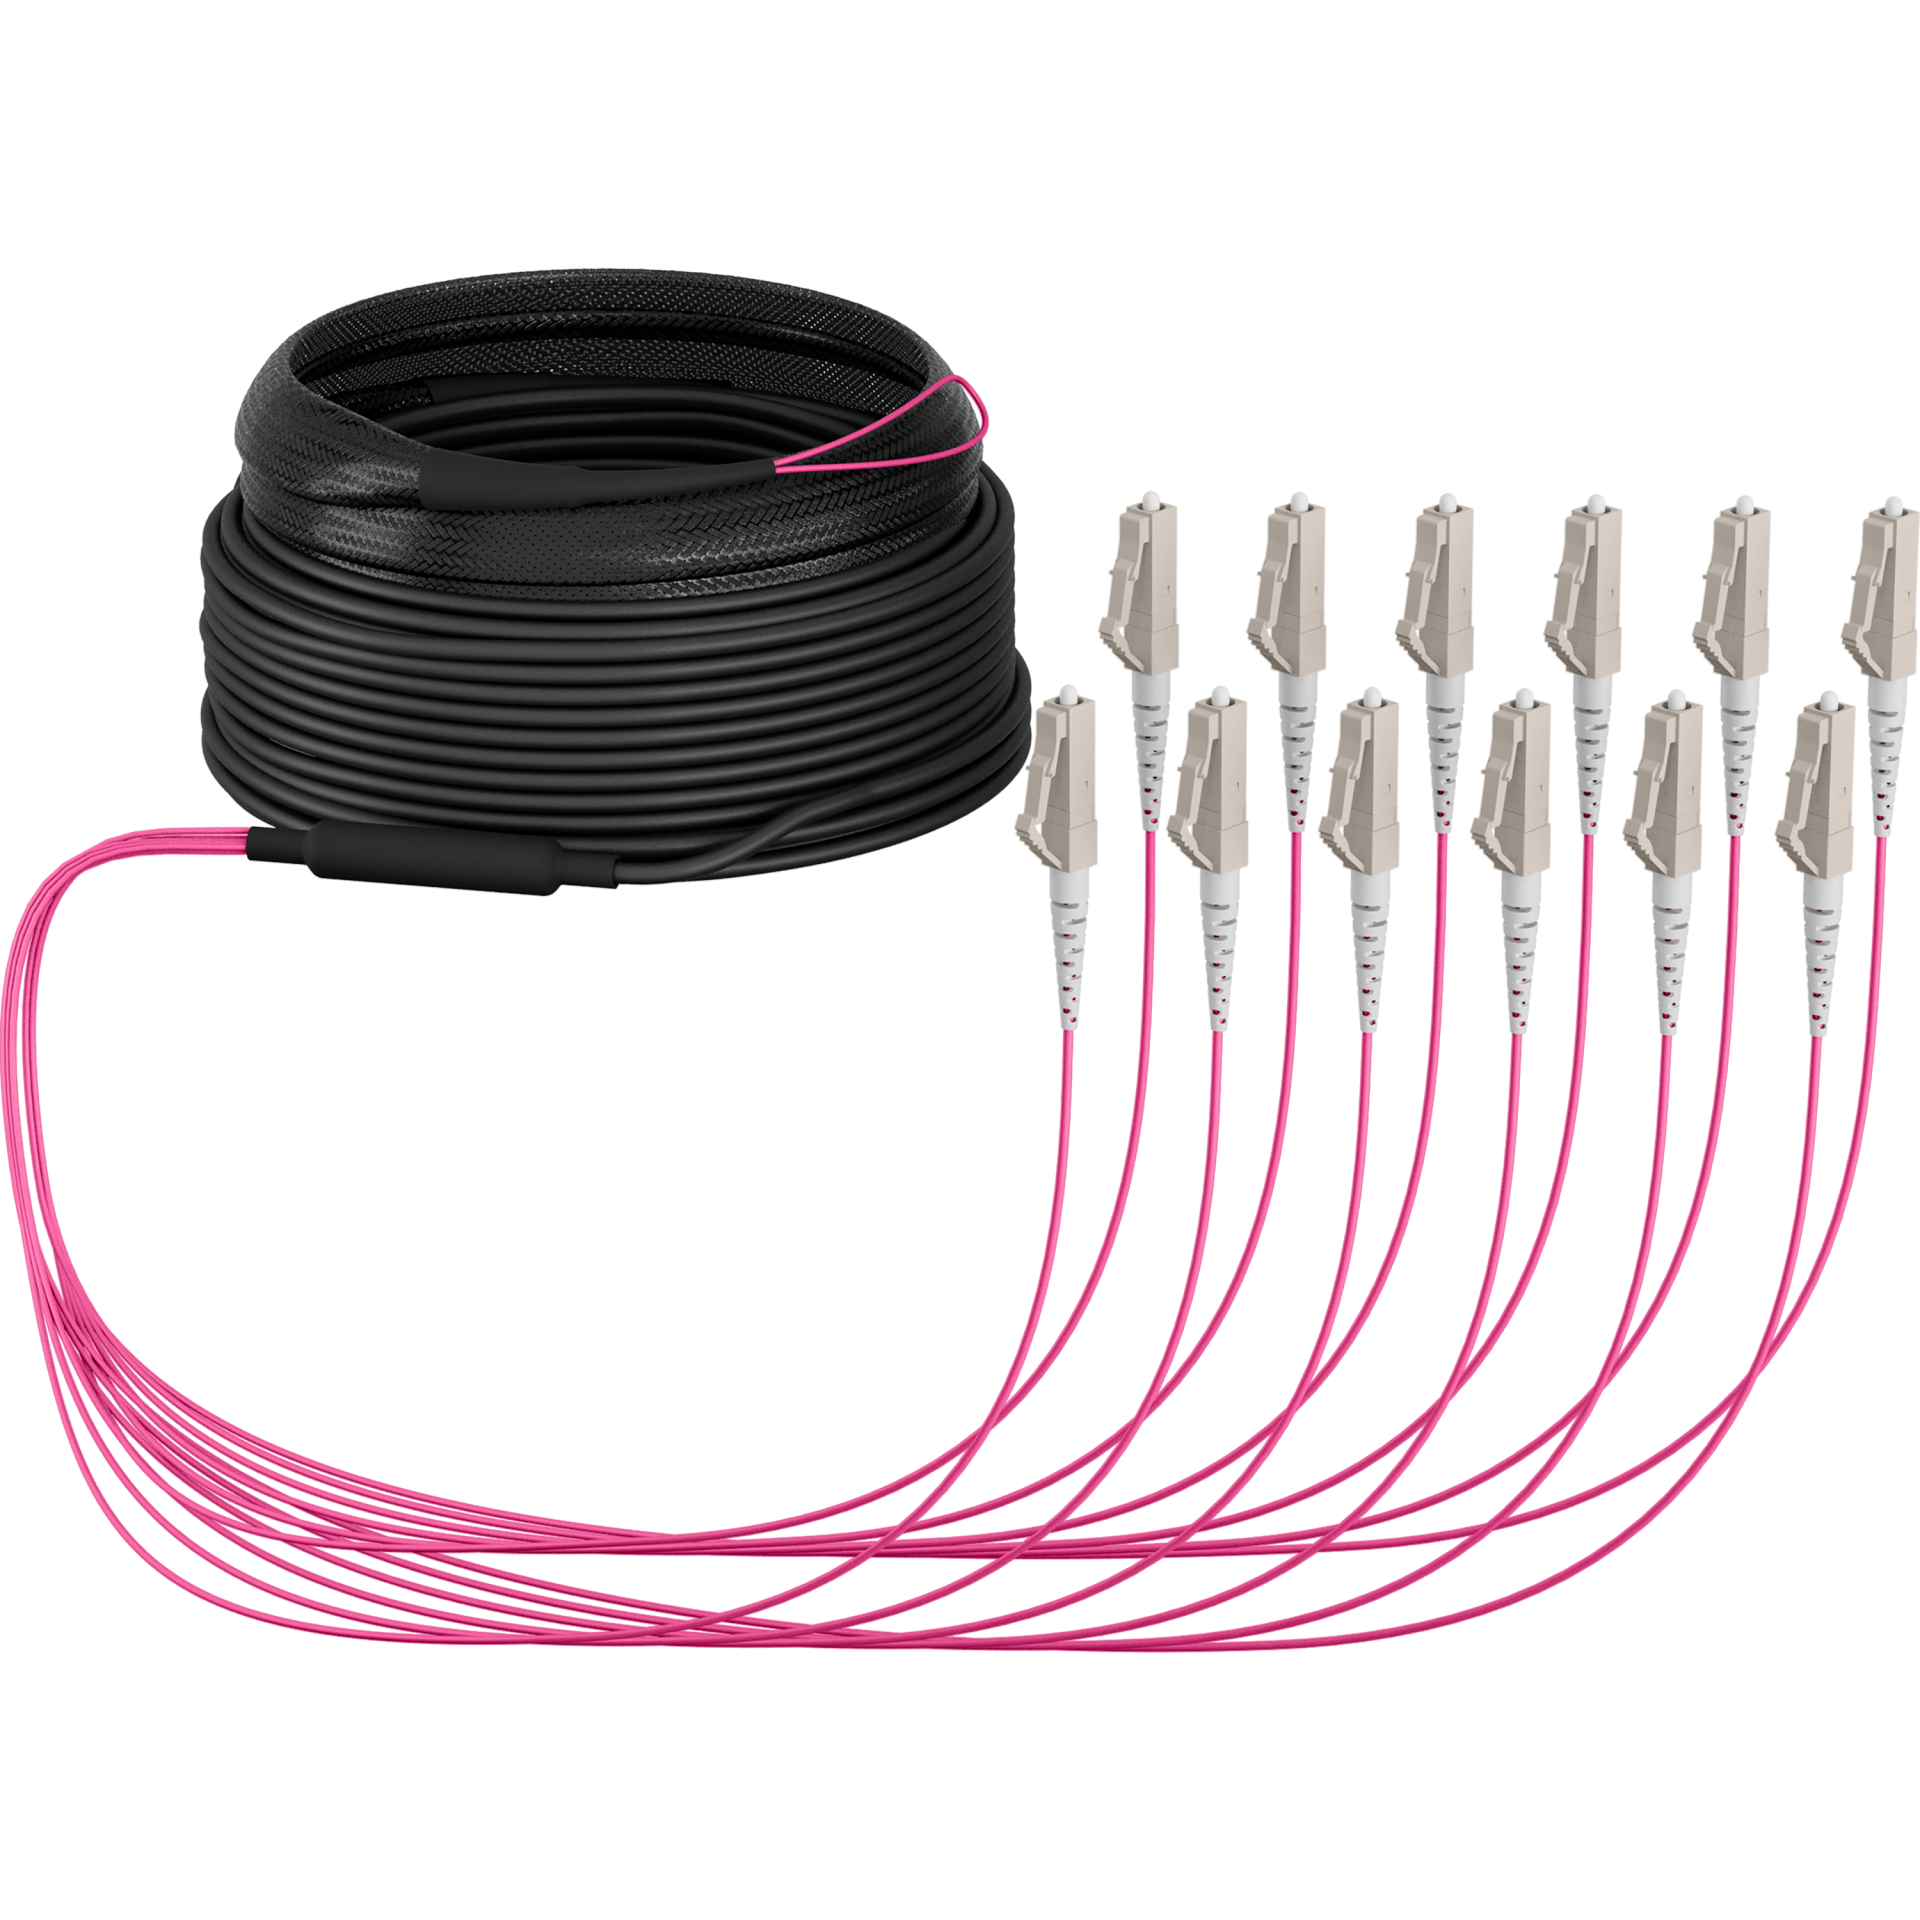 Trunkcable U-DQ(ZN)BH OM4 12G (1x12) LC-LC,10m Dca LSZH